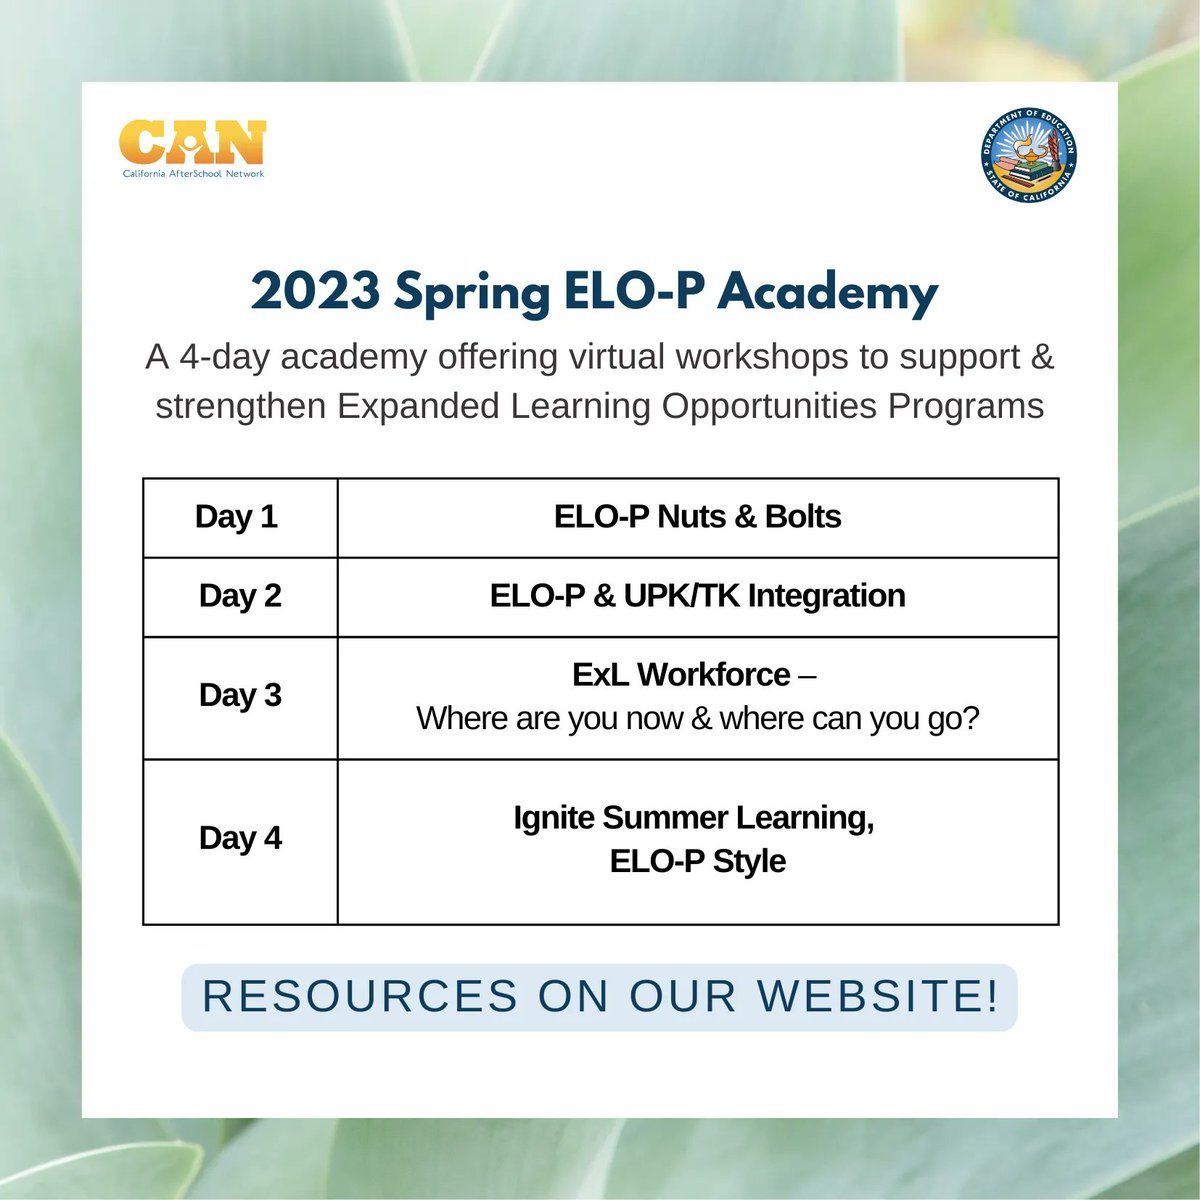 2023 Spring ELO-P Academy recordings and resources are now available on our website! buff.ly/3J03Ft7